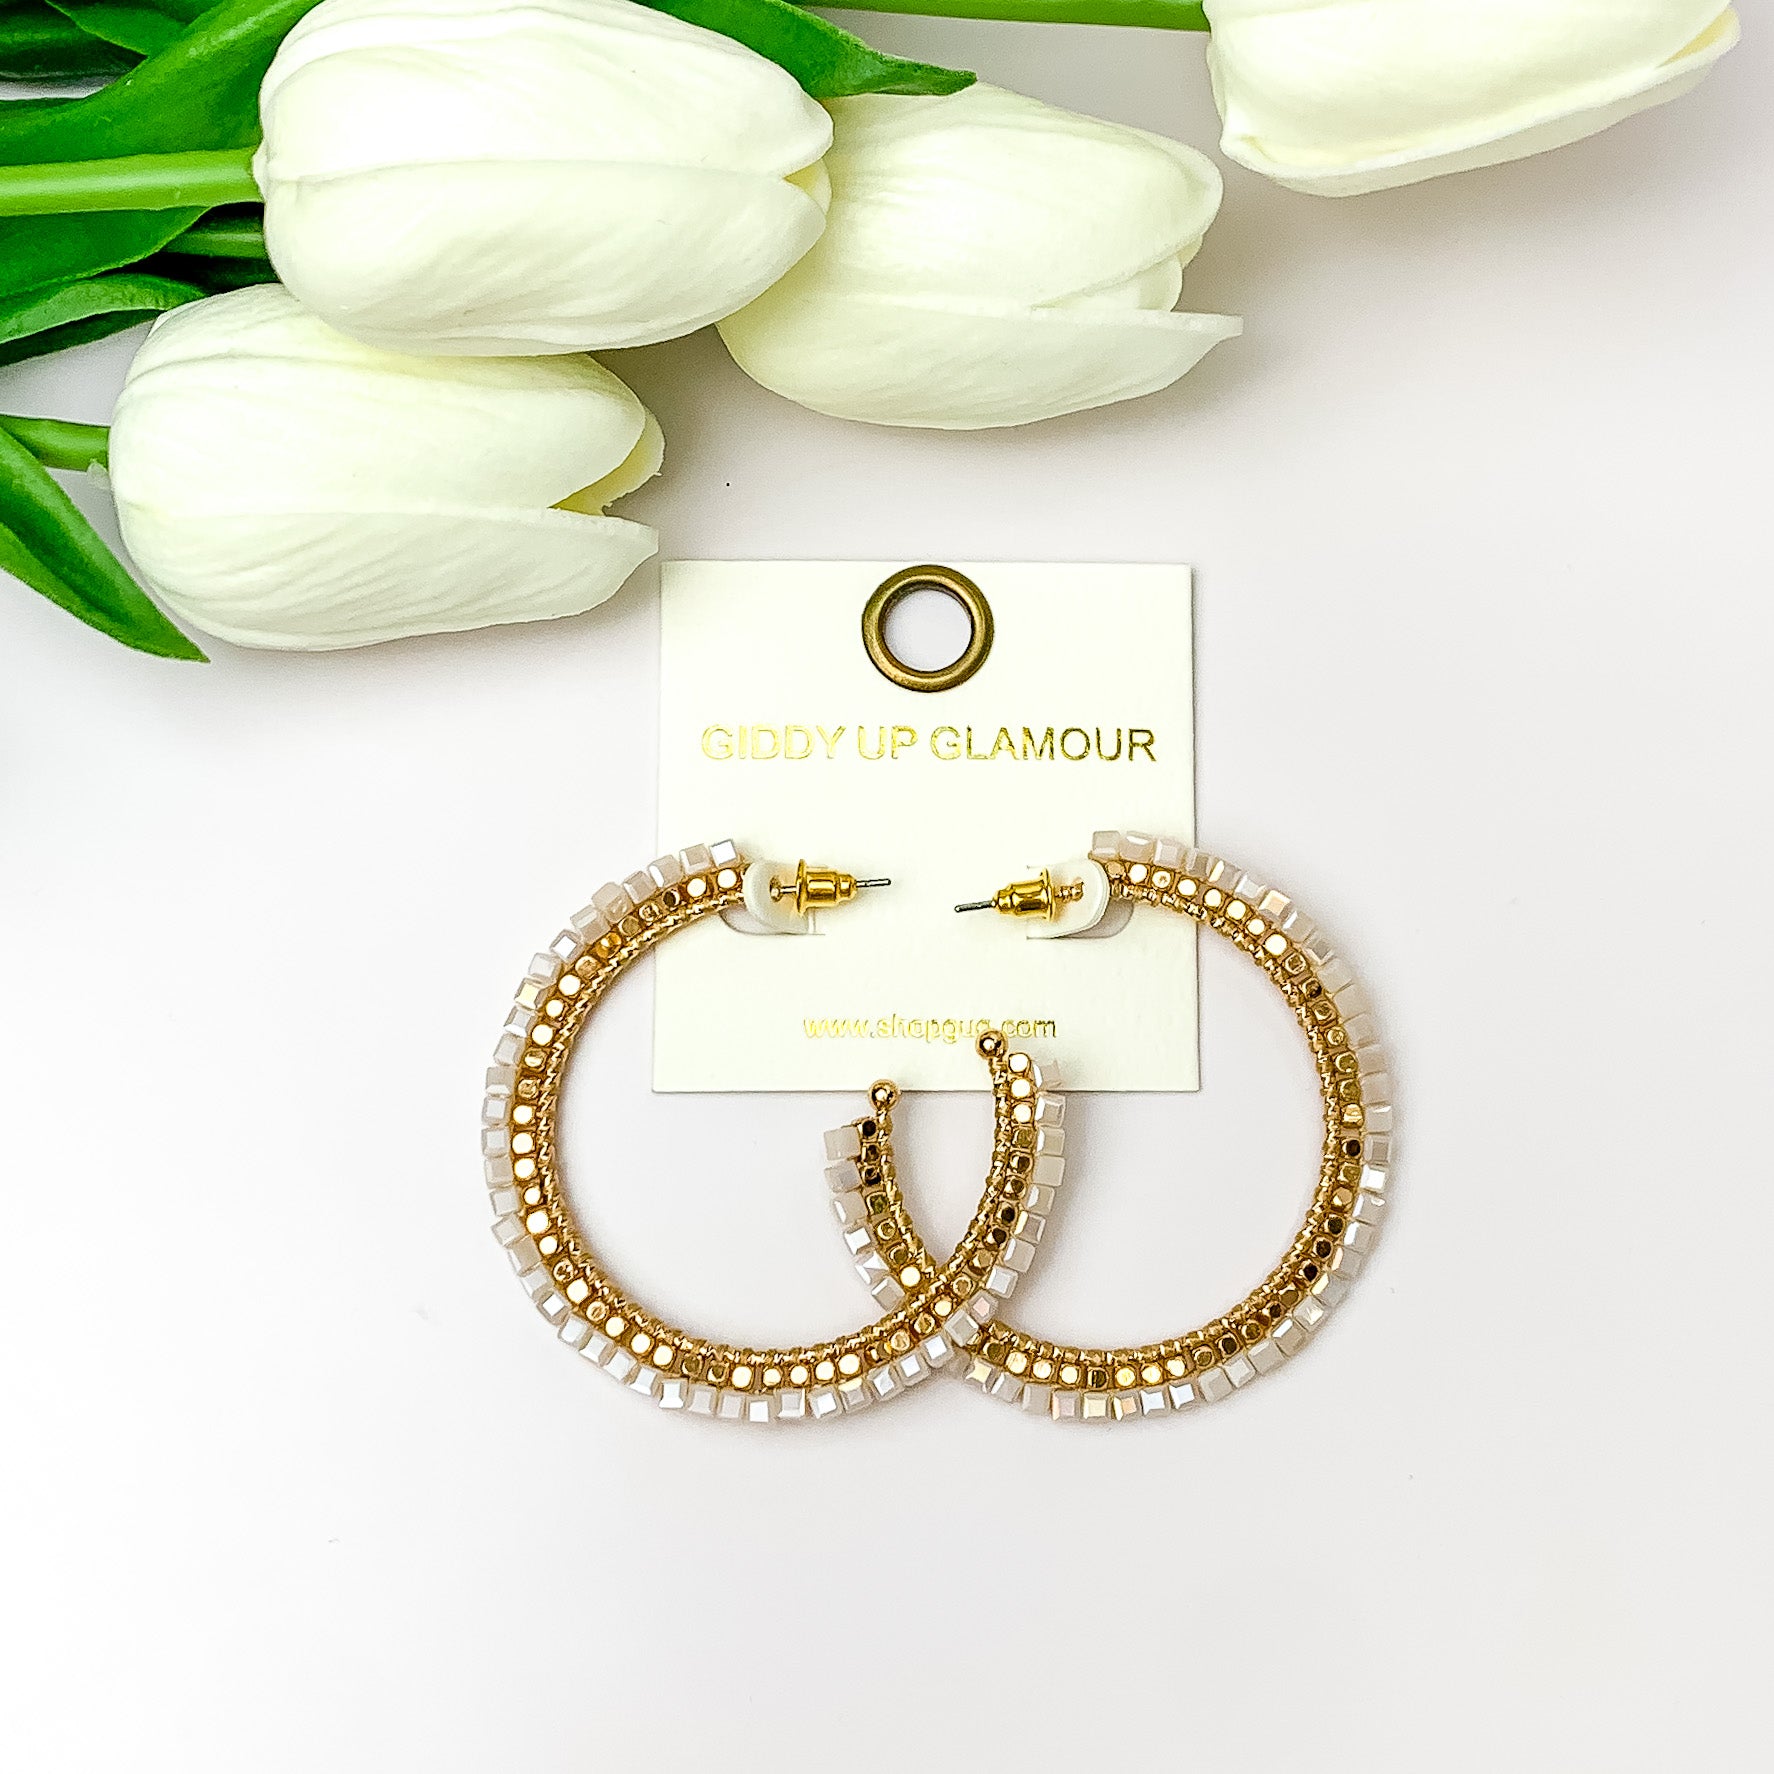 Pictured are circle gold toned hoop earrings with gold beads around it and a palr pink crystal outline. They are pictured with white flowers on a white background.